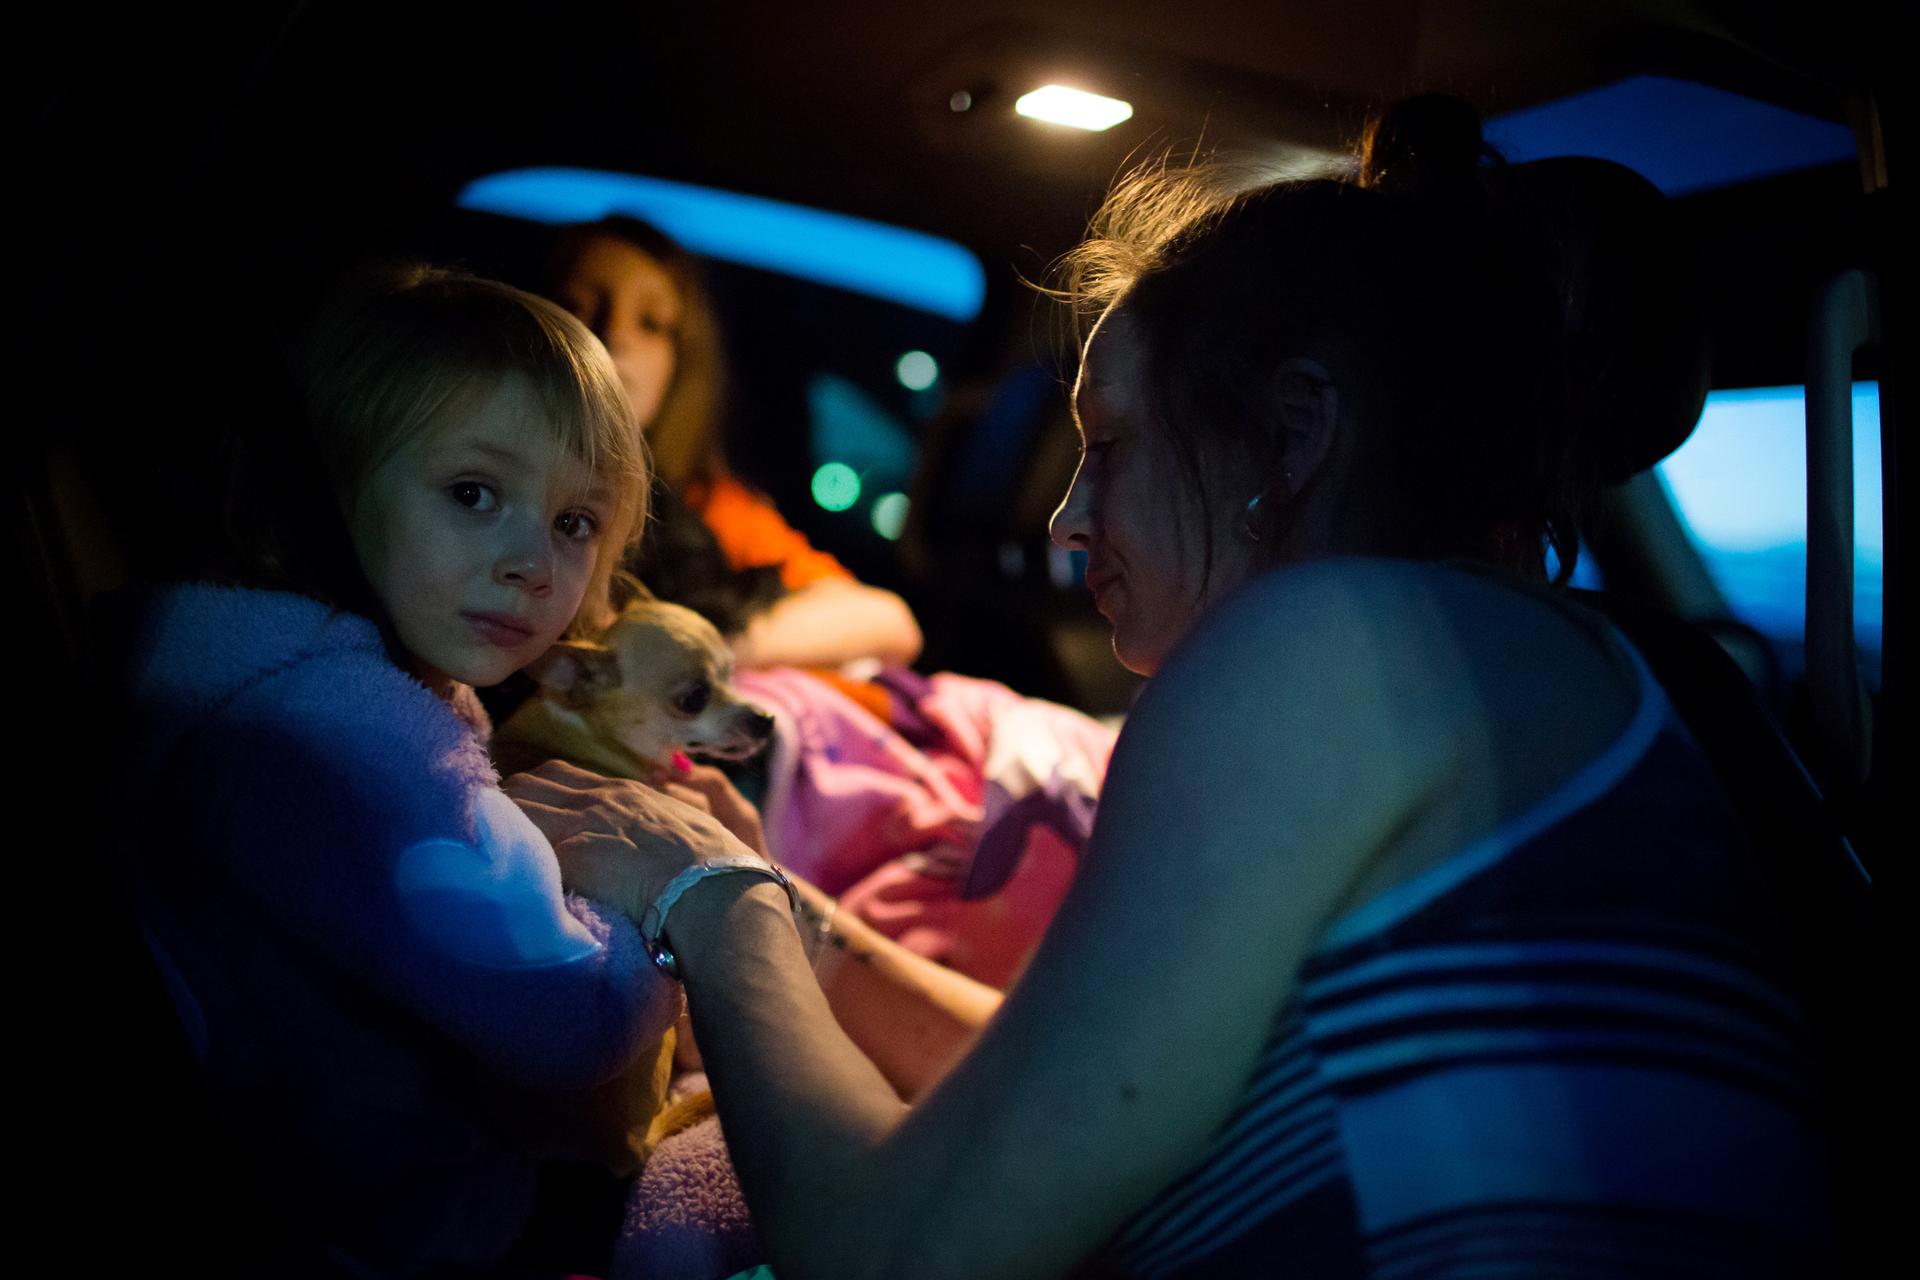 Fort McMurray resident Crystal Maltais buckles in her daughter, Mckennah Stapley, as they prepare to leave Conklin, Alberta, for Lac La Biche after evacuating their home in Fort McMurray on Tuesday May 3, 2016.